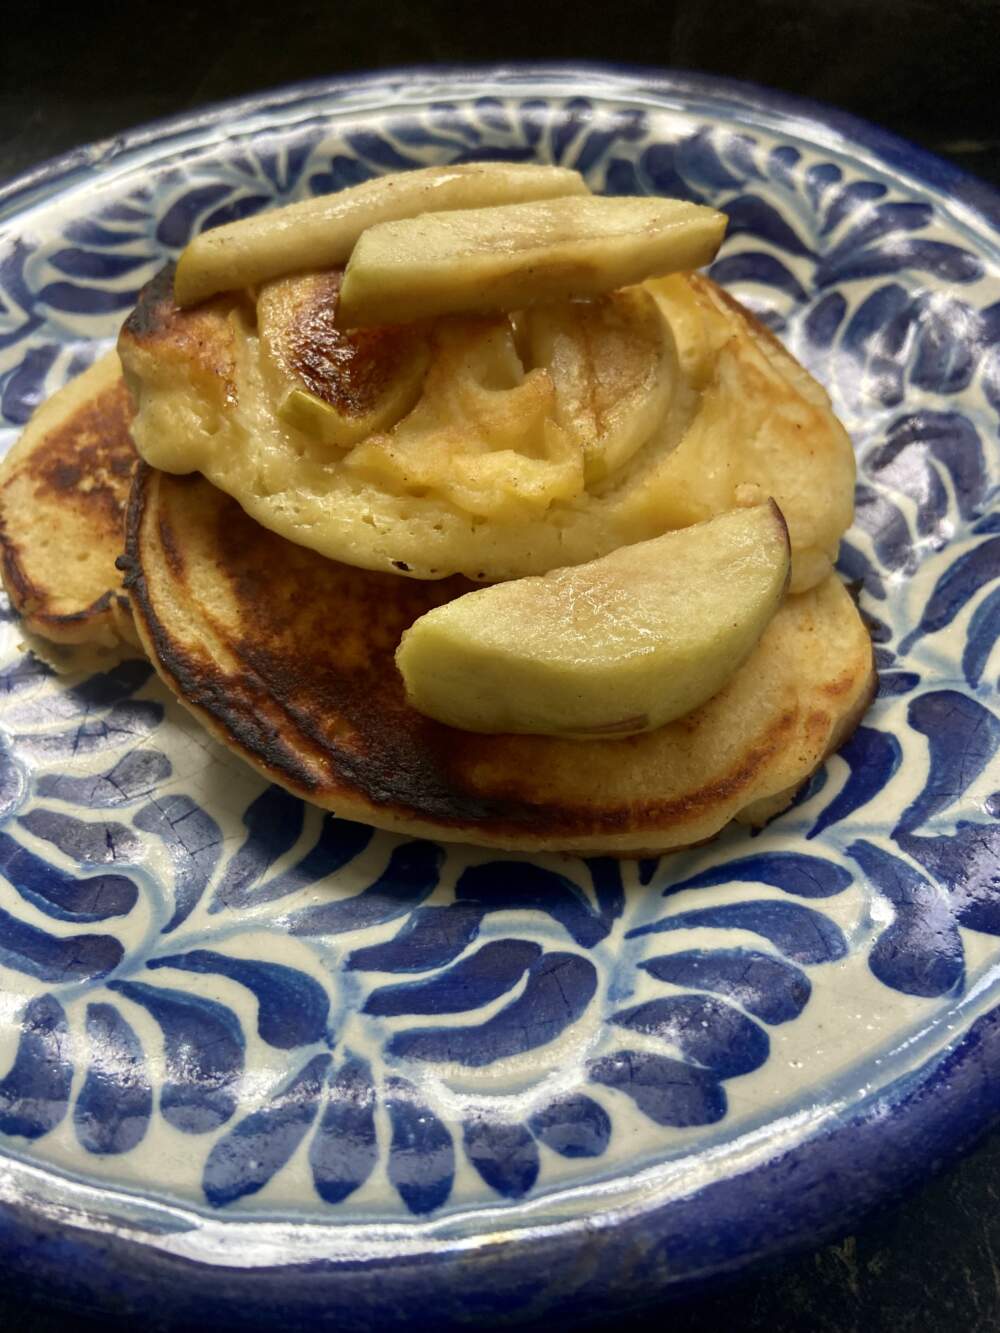 Buttermilk-almond pancakes with maple-glazed apple slices. (Kathy Gunst/Here & Now)